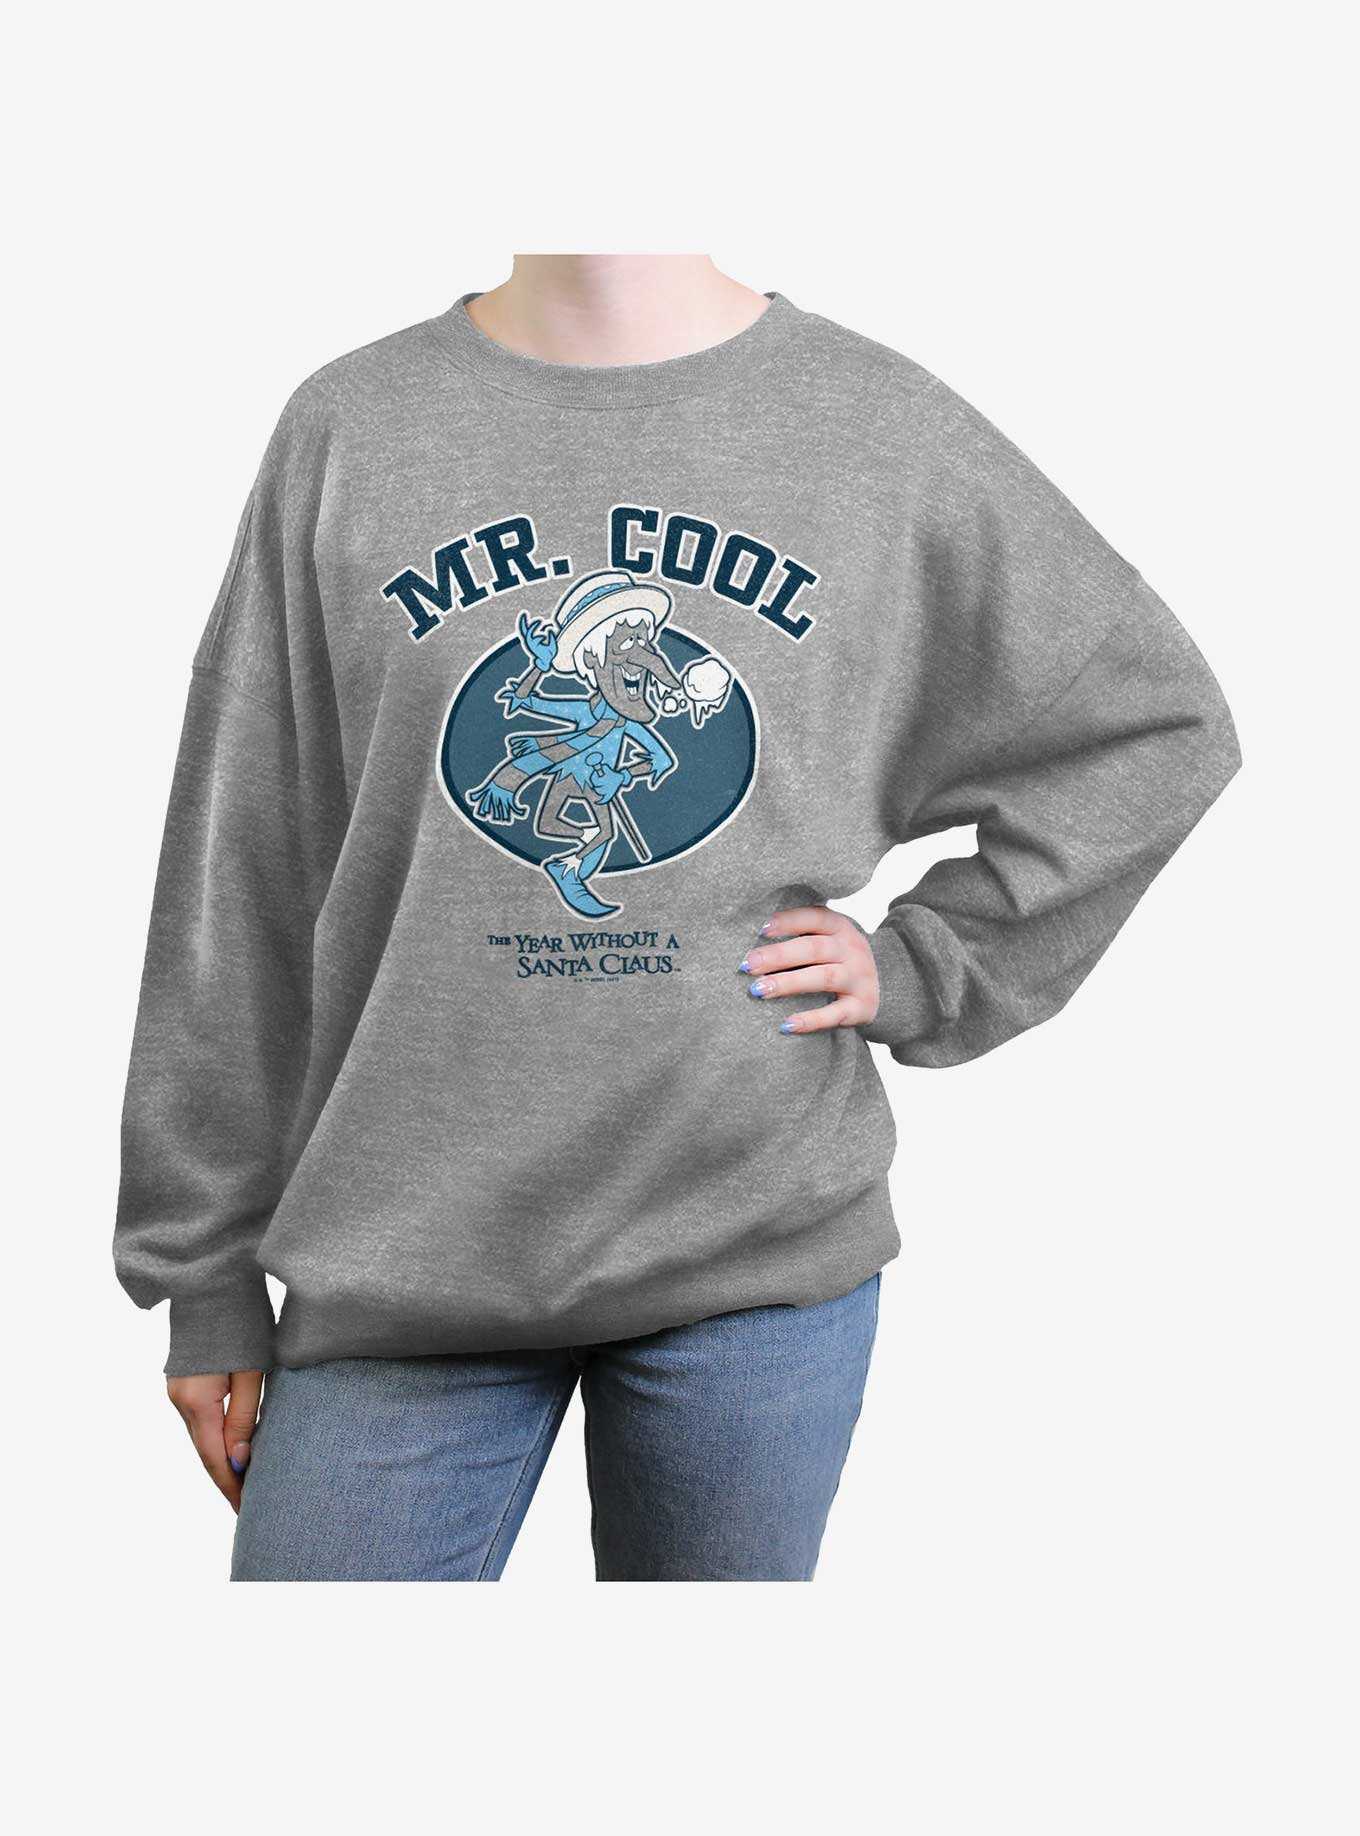 The Year Without a Santa Claus Mr. Cool Collegiate Girls Oversized Sweatshirt, , hi-res